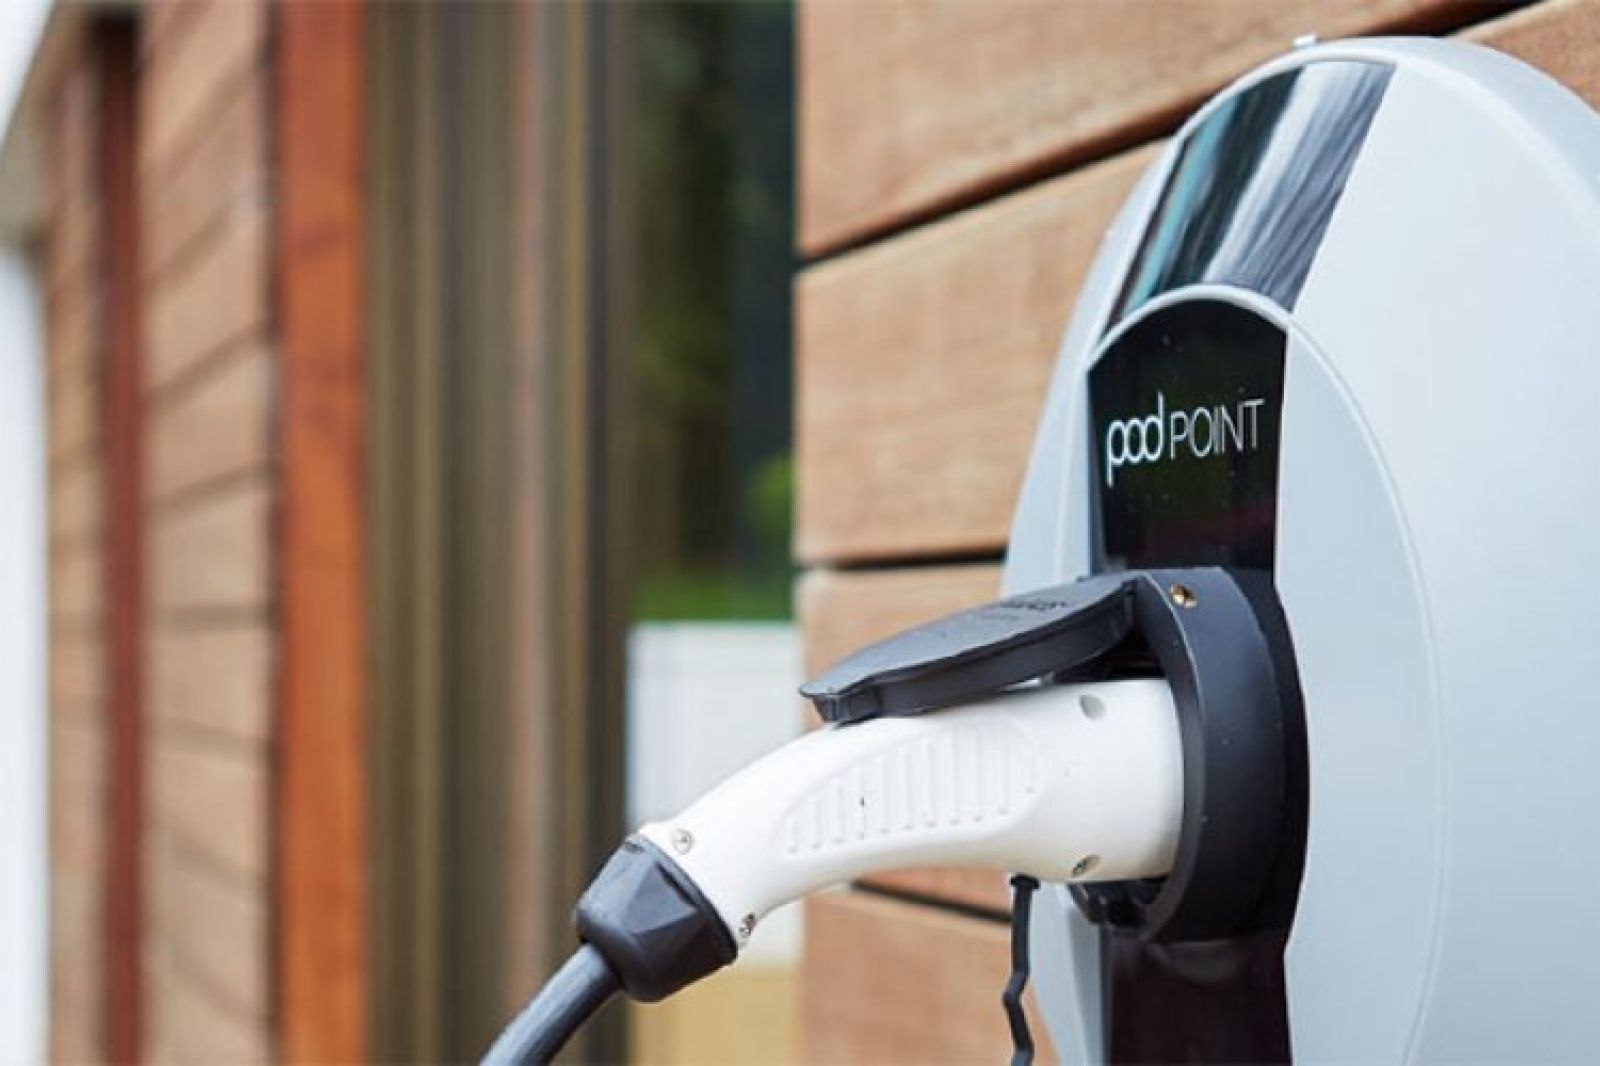 Electric dreams and home charging The Nissan Leaf meets PodPoint image 1